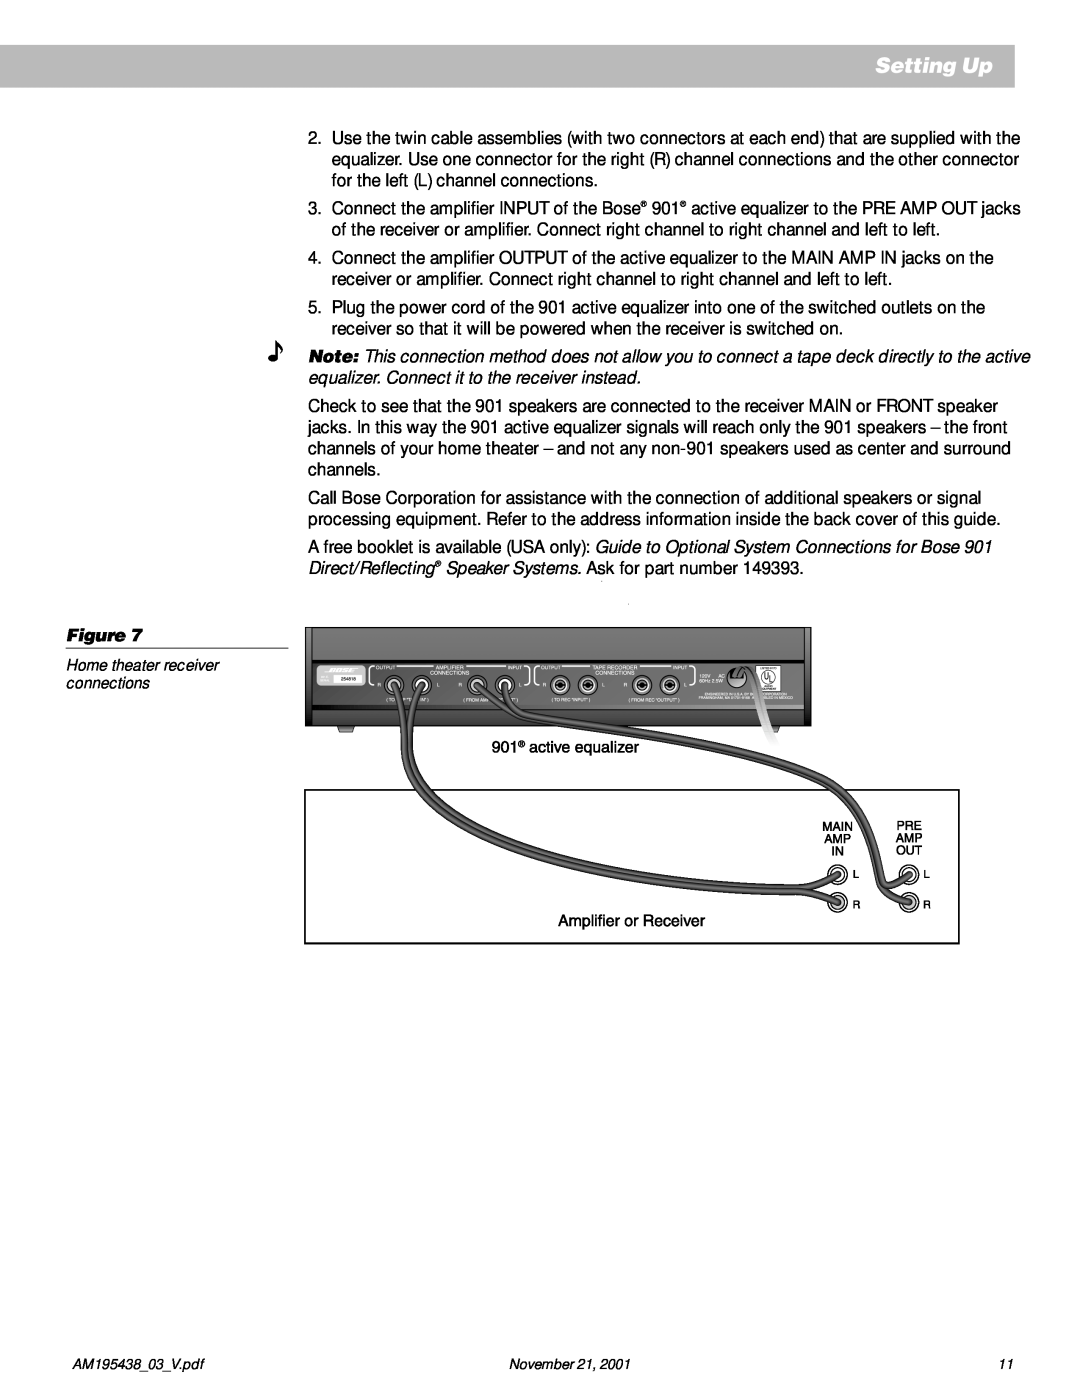 Bose 901 manual Setting Up, Home theater receiver connections, November 